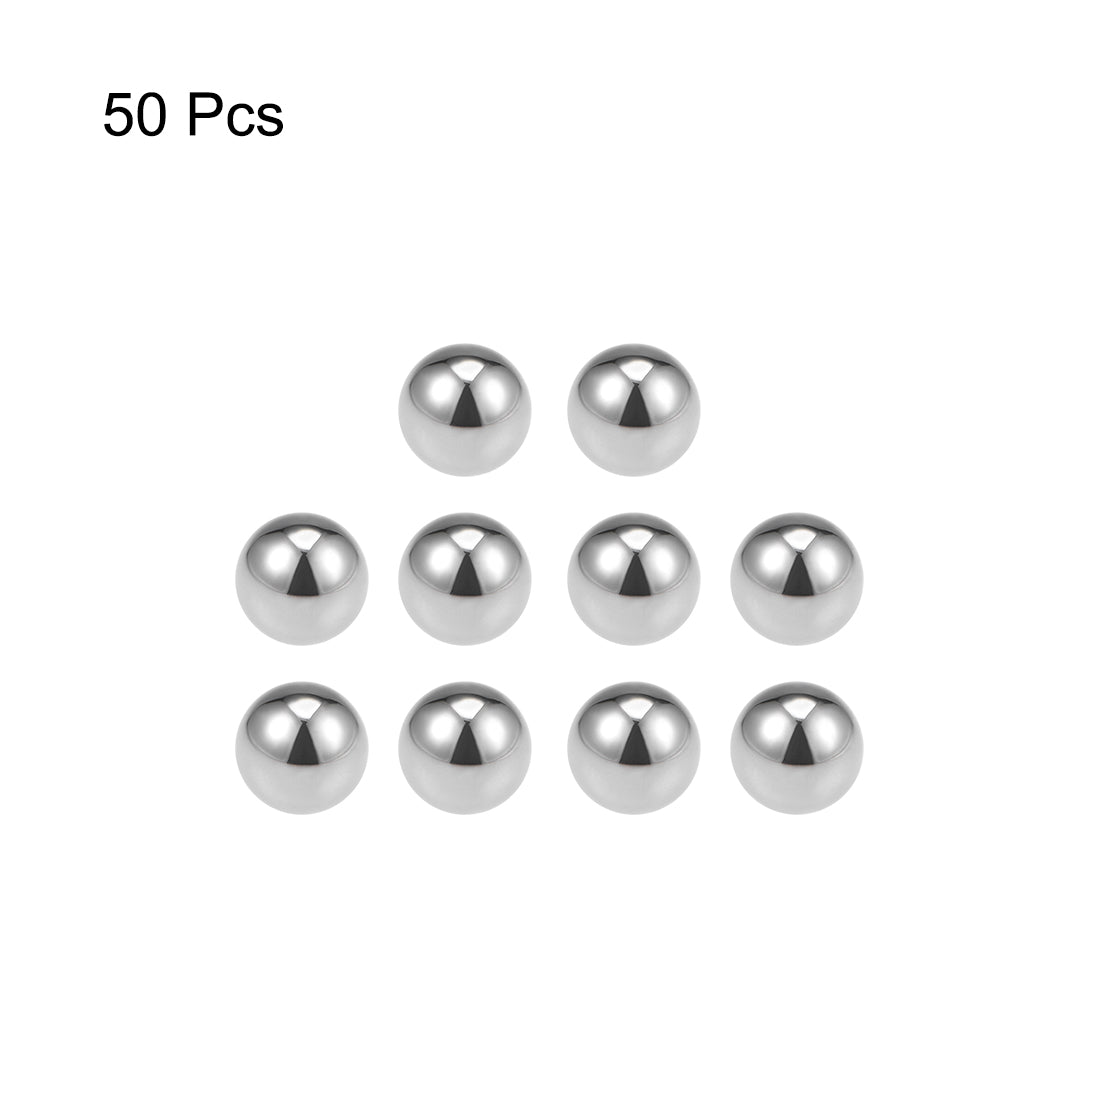 uxcell Uxcell Precision Balls 3/16" Solid Chrome Steel G25 for Ball Bearing Wheel 50pcs